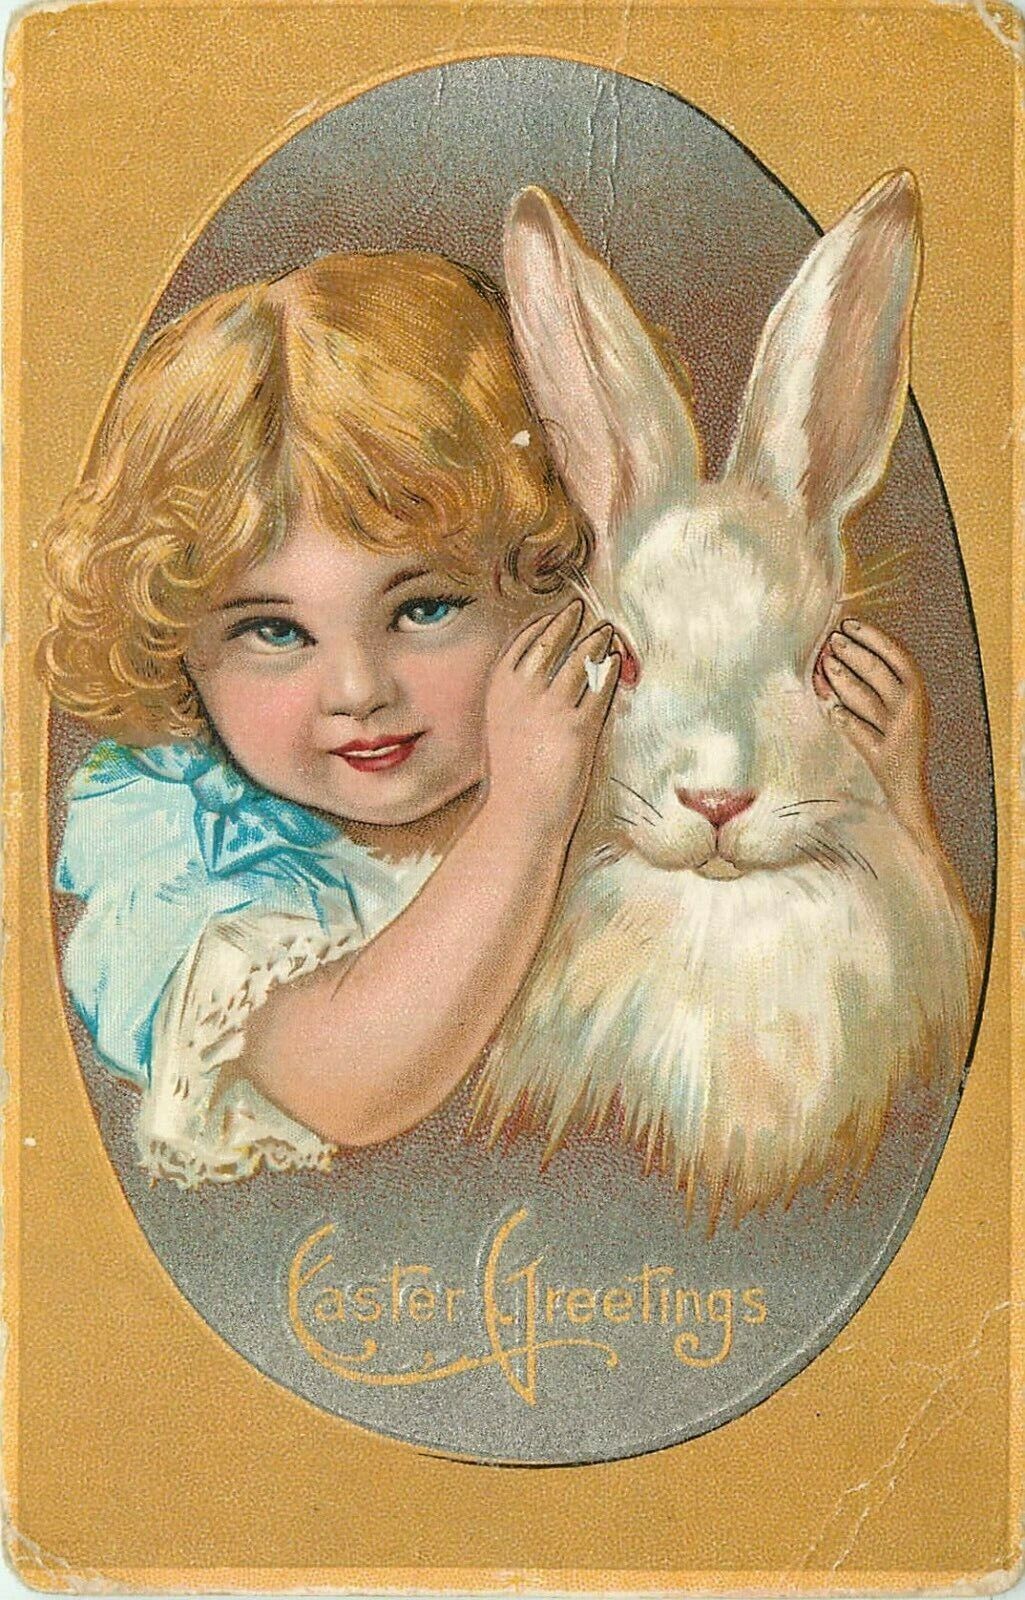 Little Girl with Bunny Rabbit Chick Easter Greetings Postcard